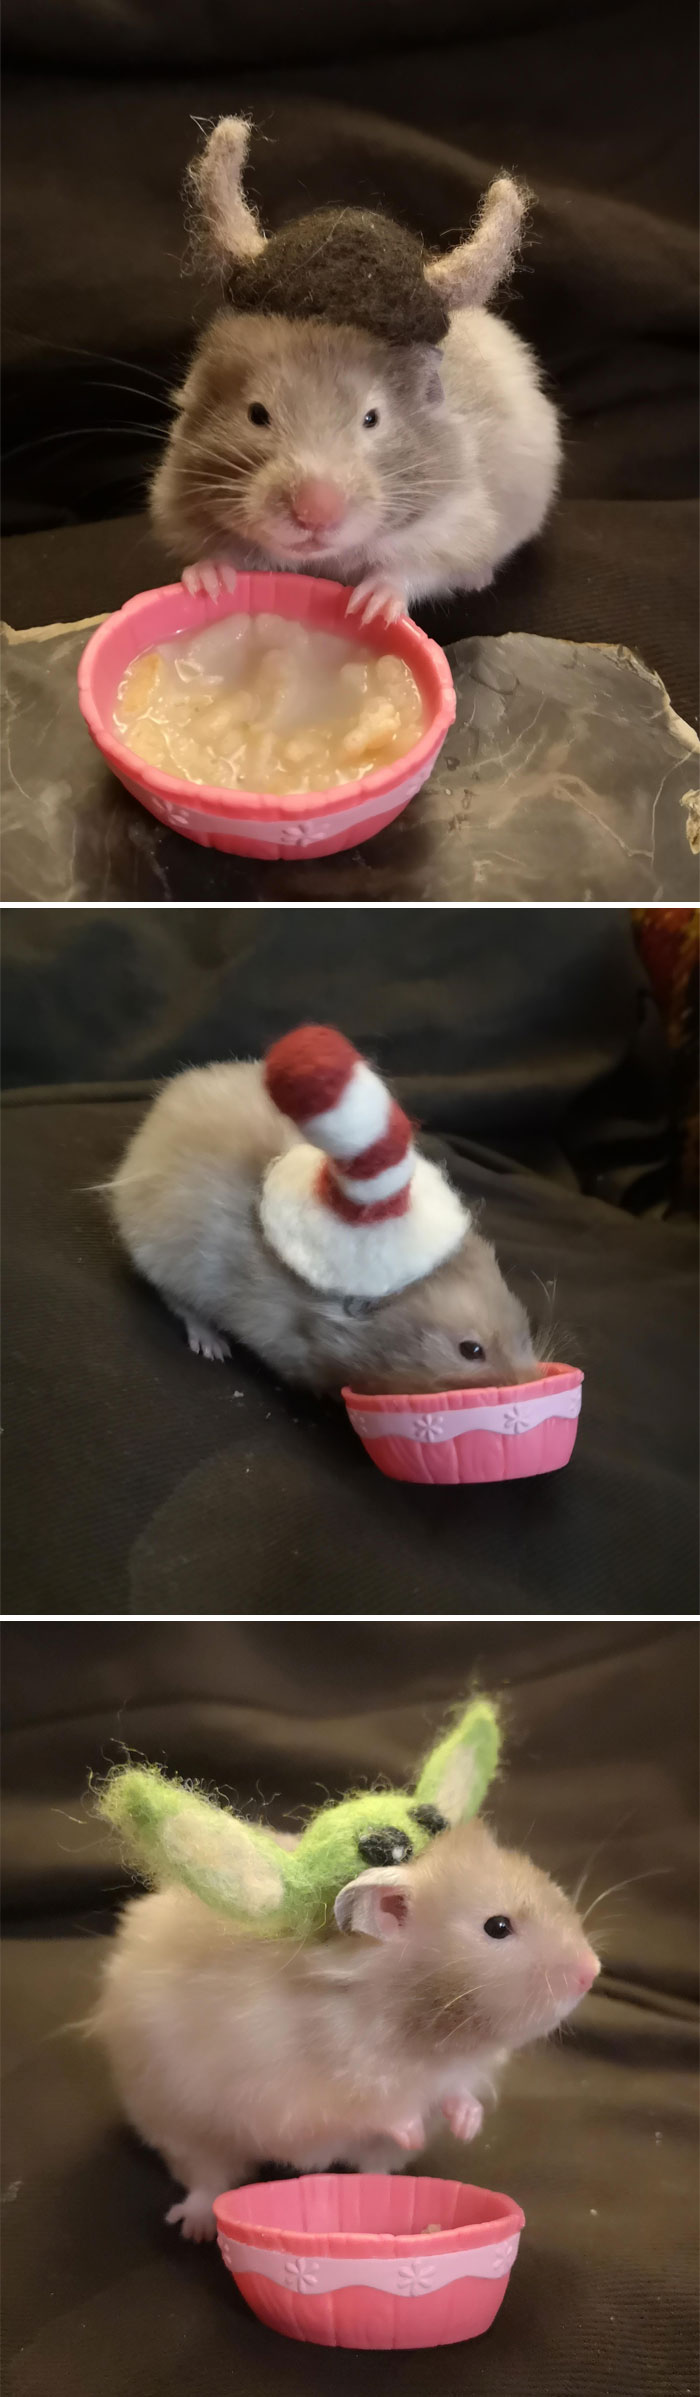 Gray hamster eating while wearing different hats